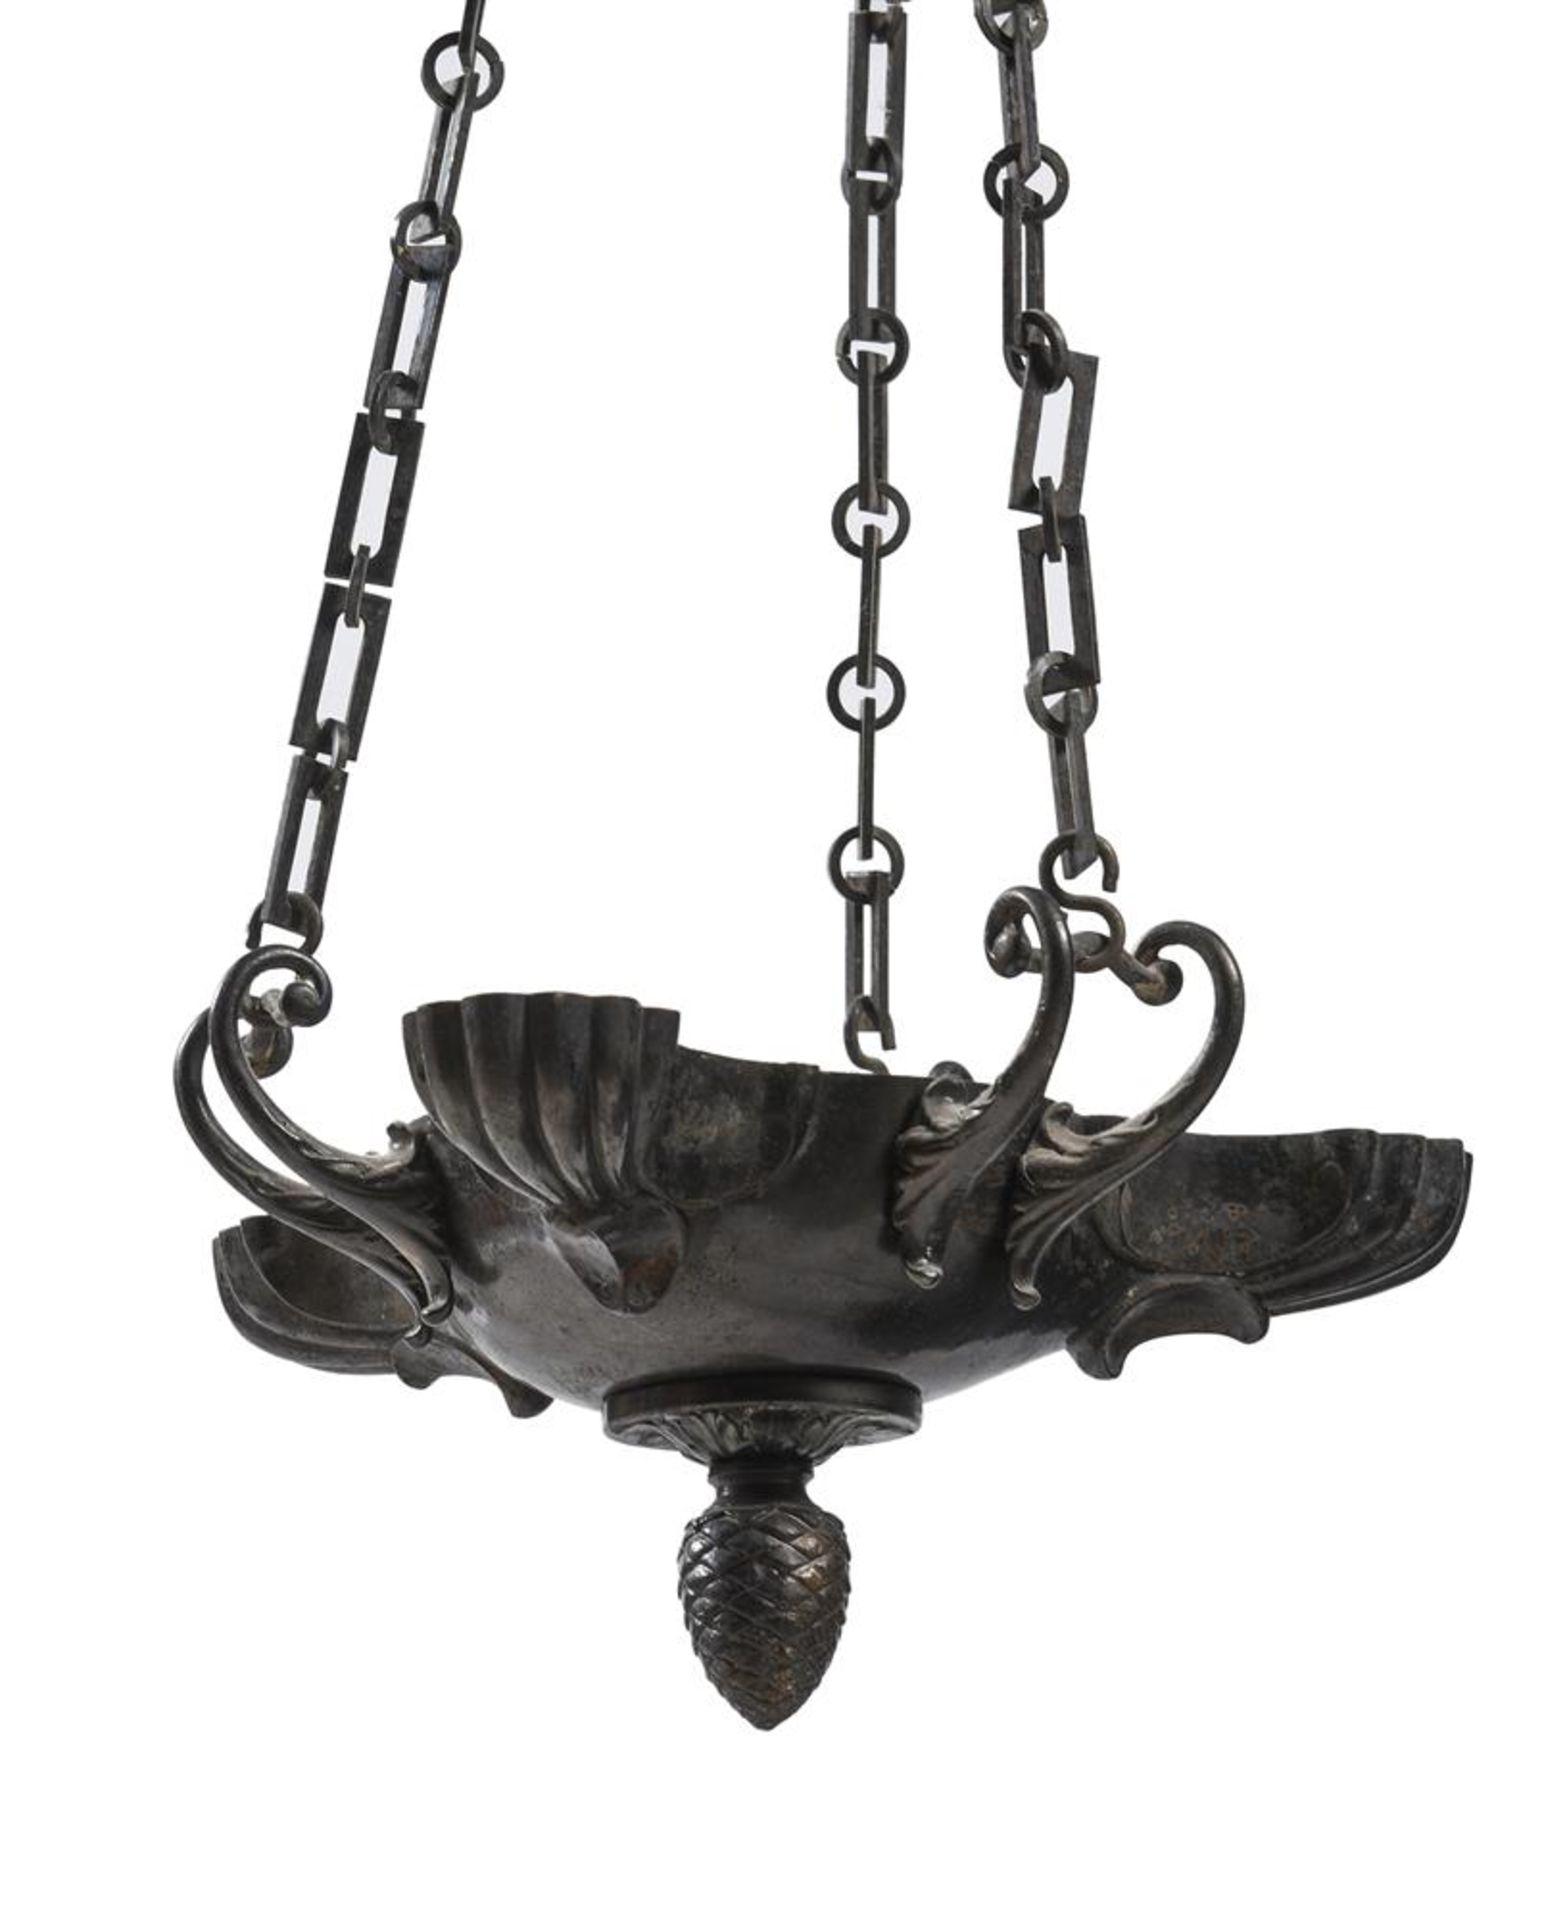 A PAIR OF WILLIAM IV COLZA HANGING LIGHTS, CIRCA 1830-1840 - Image 3 of 3